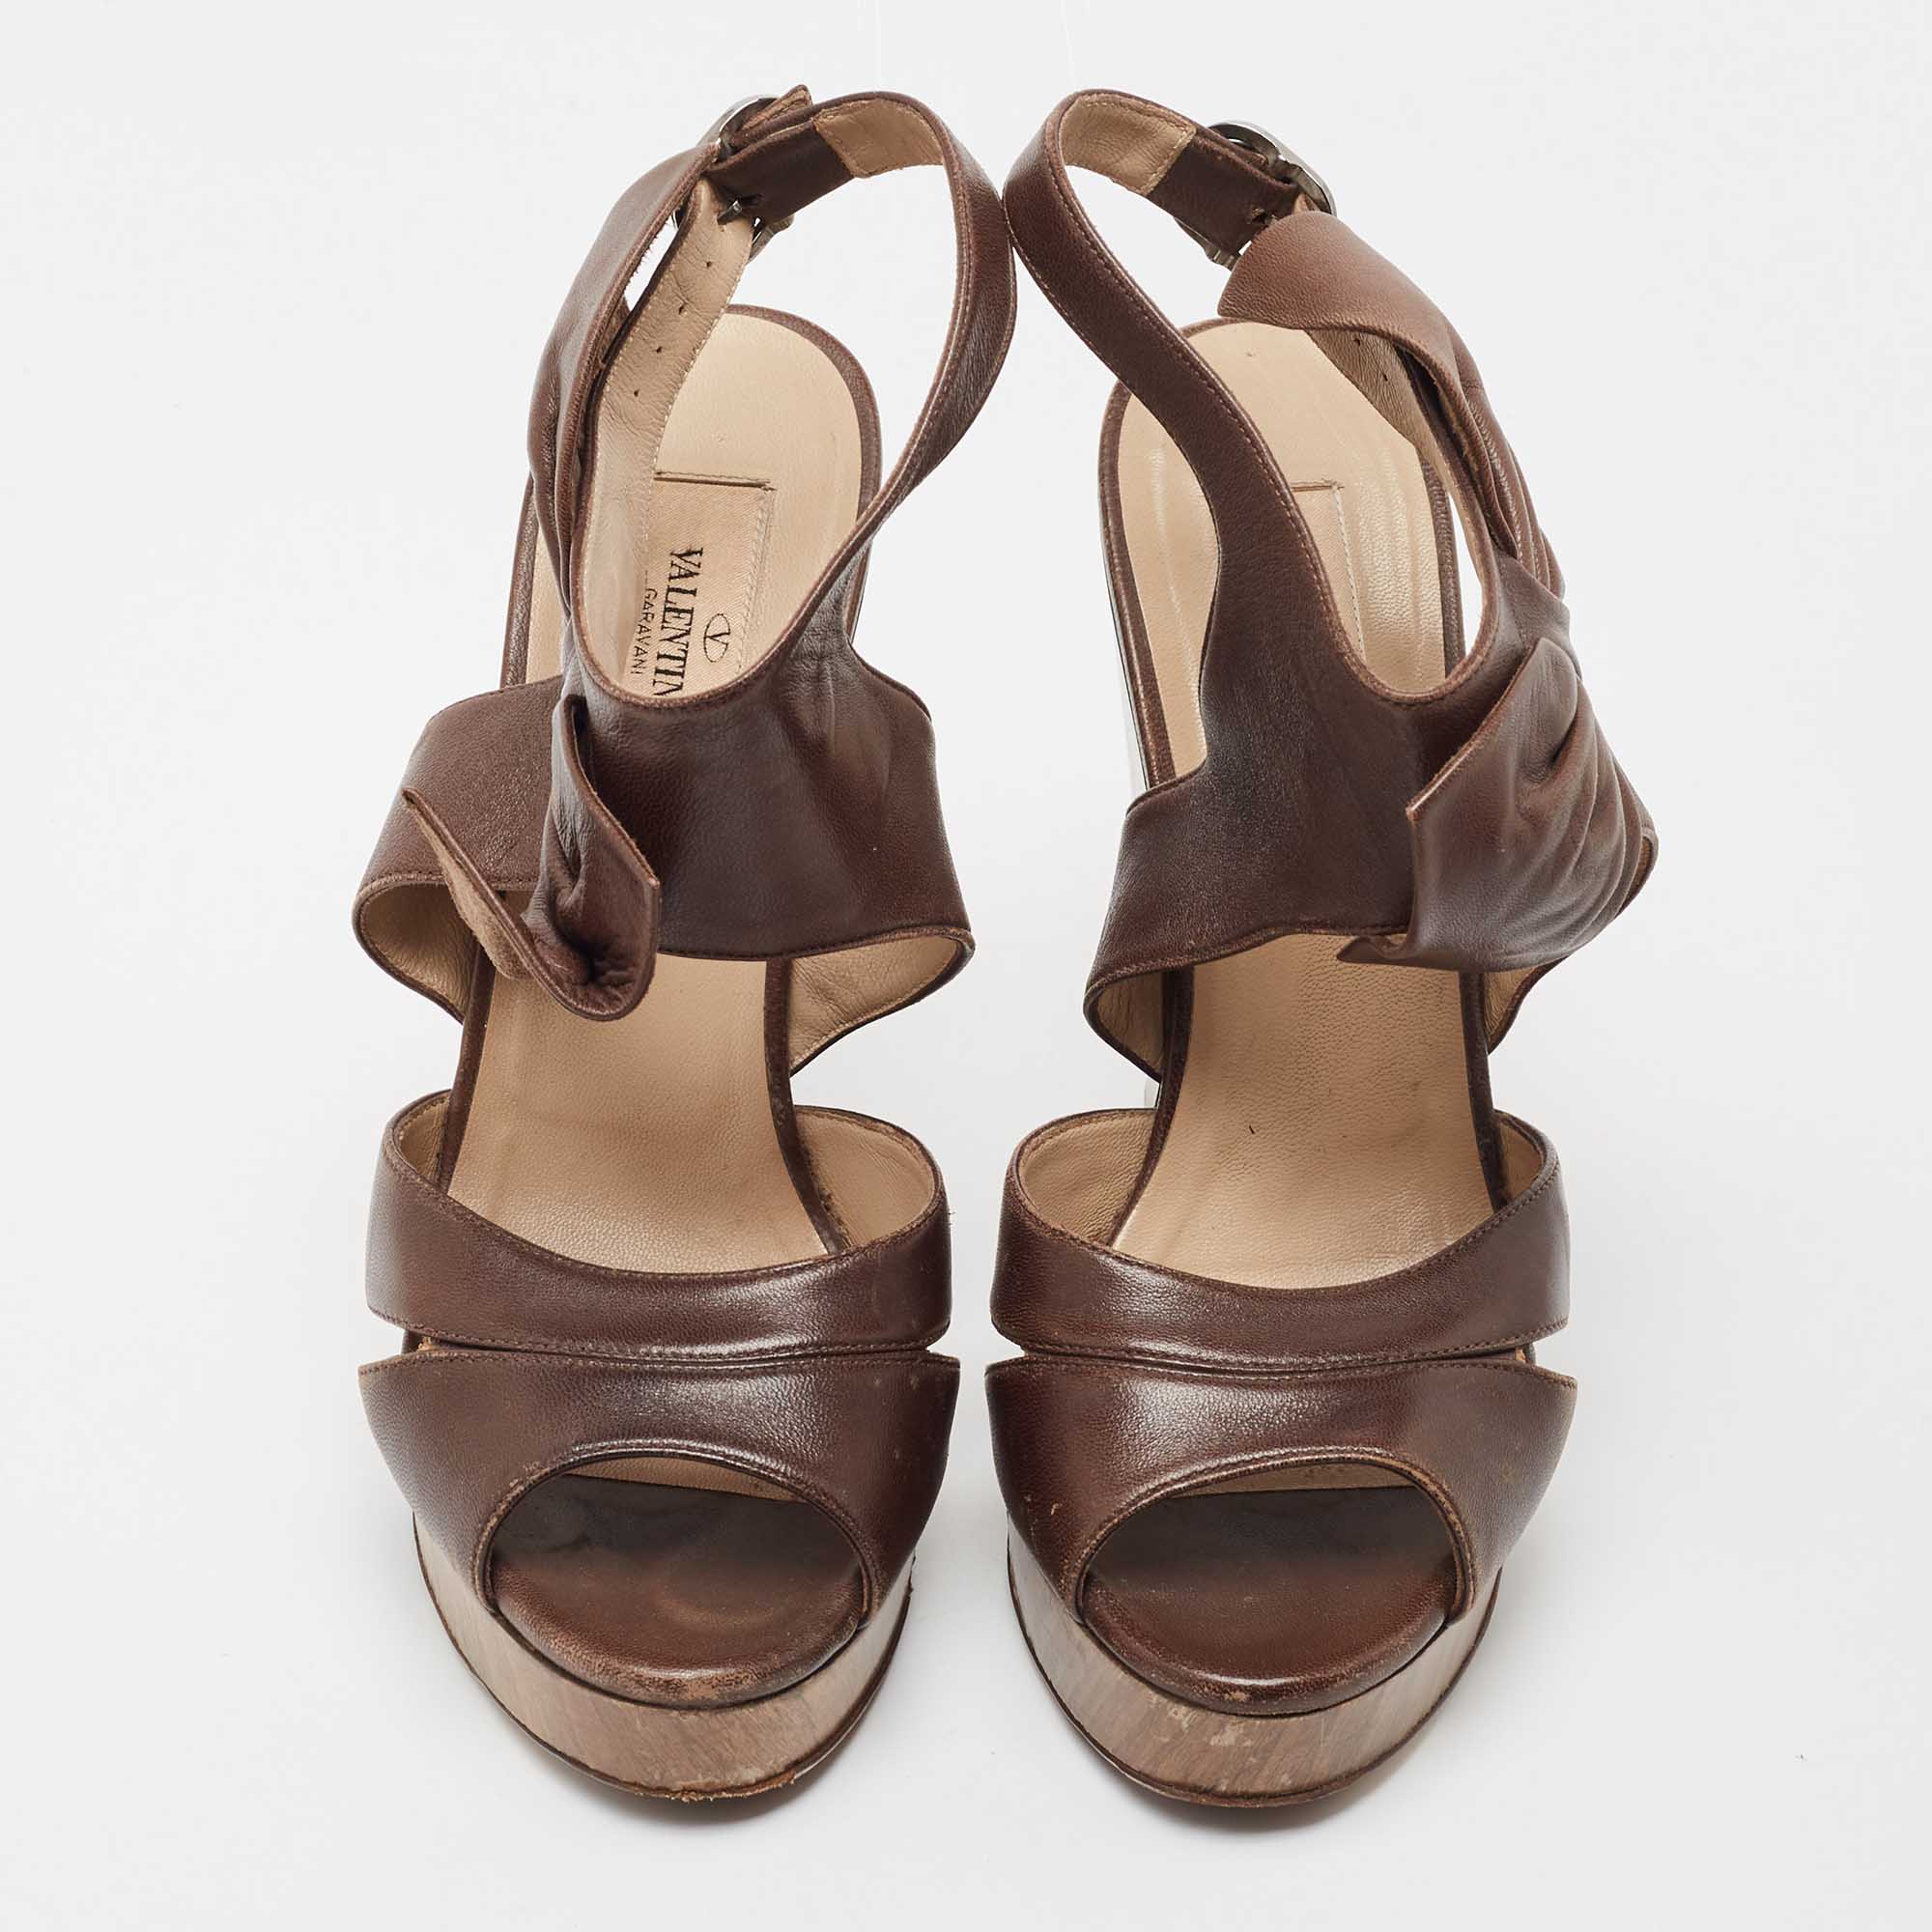 Valentino Brown Leather Wedge Sandals Size 37